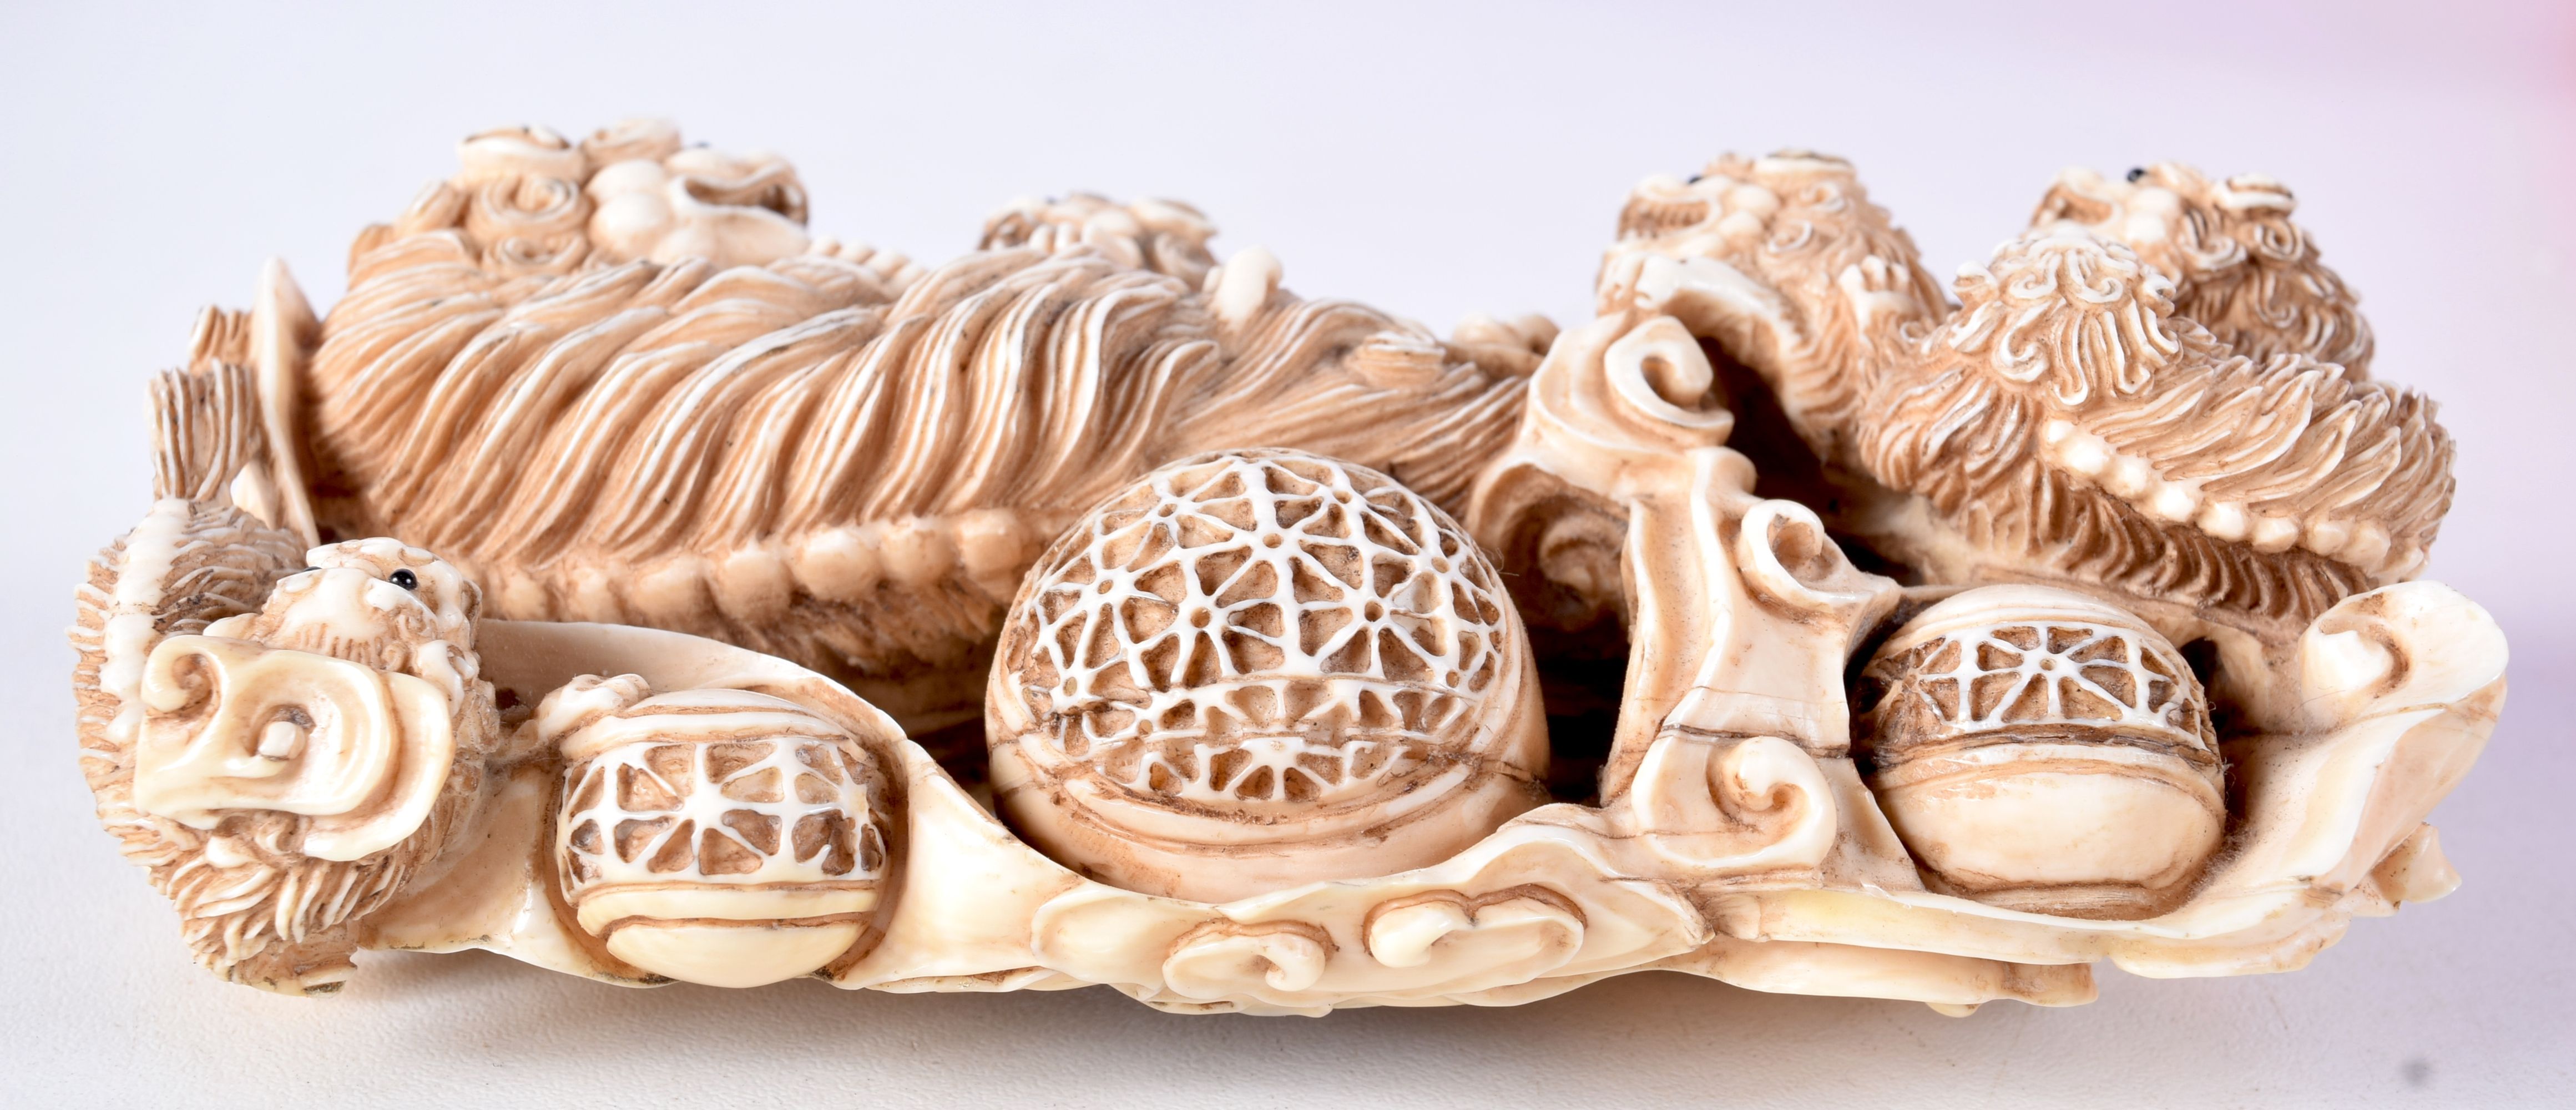 A FINE 19TH CENTURY JAPANESE MEIJI PERIOD CARVED IVORY OKIMONO modelled as numerous beasts in a play - Image 2 of 5